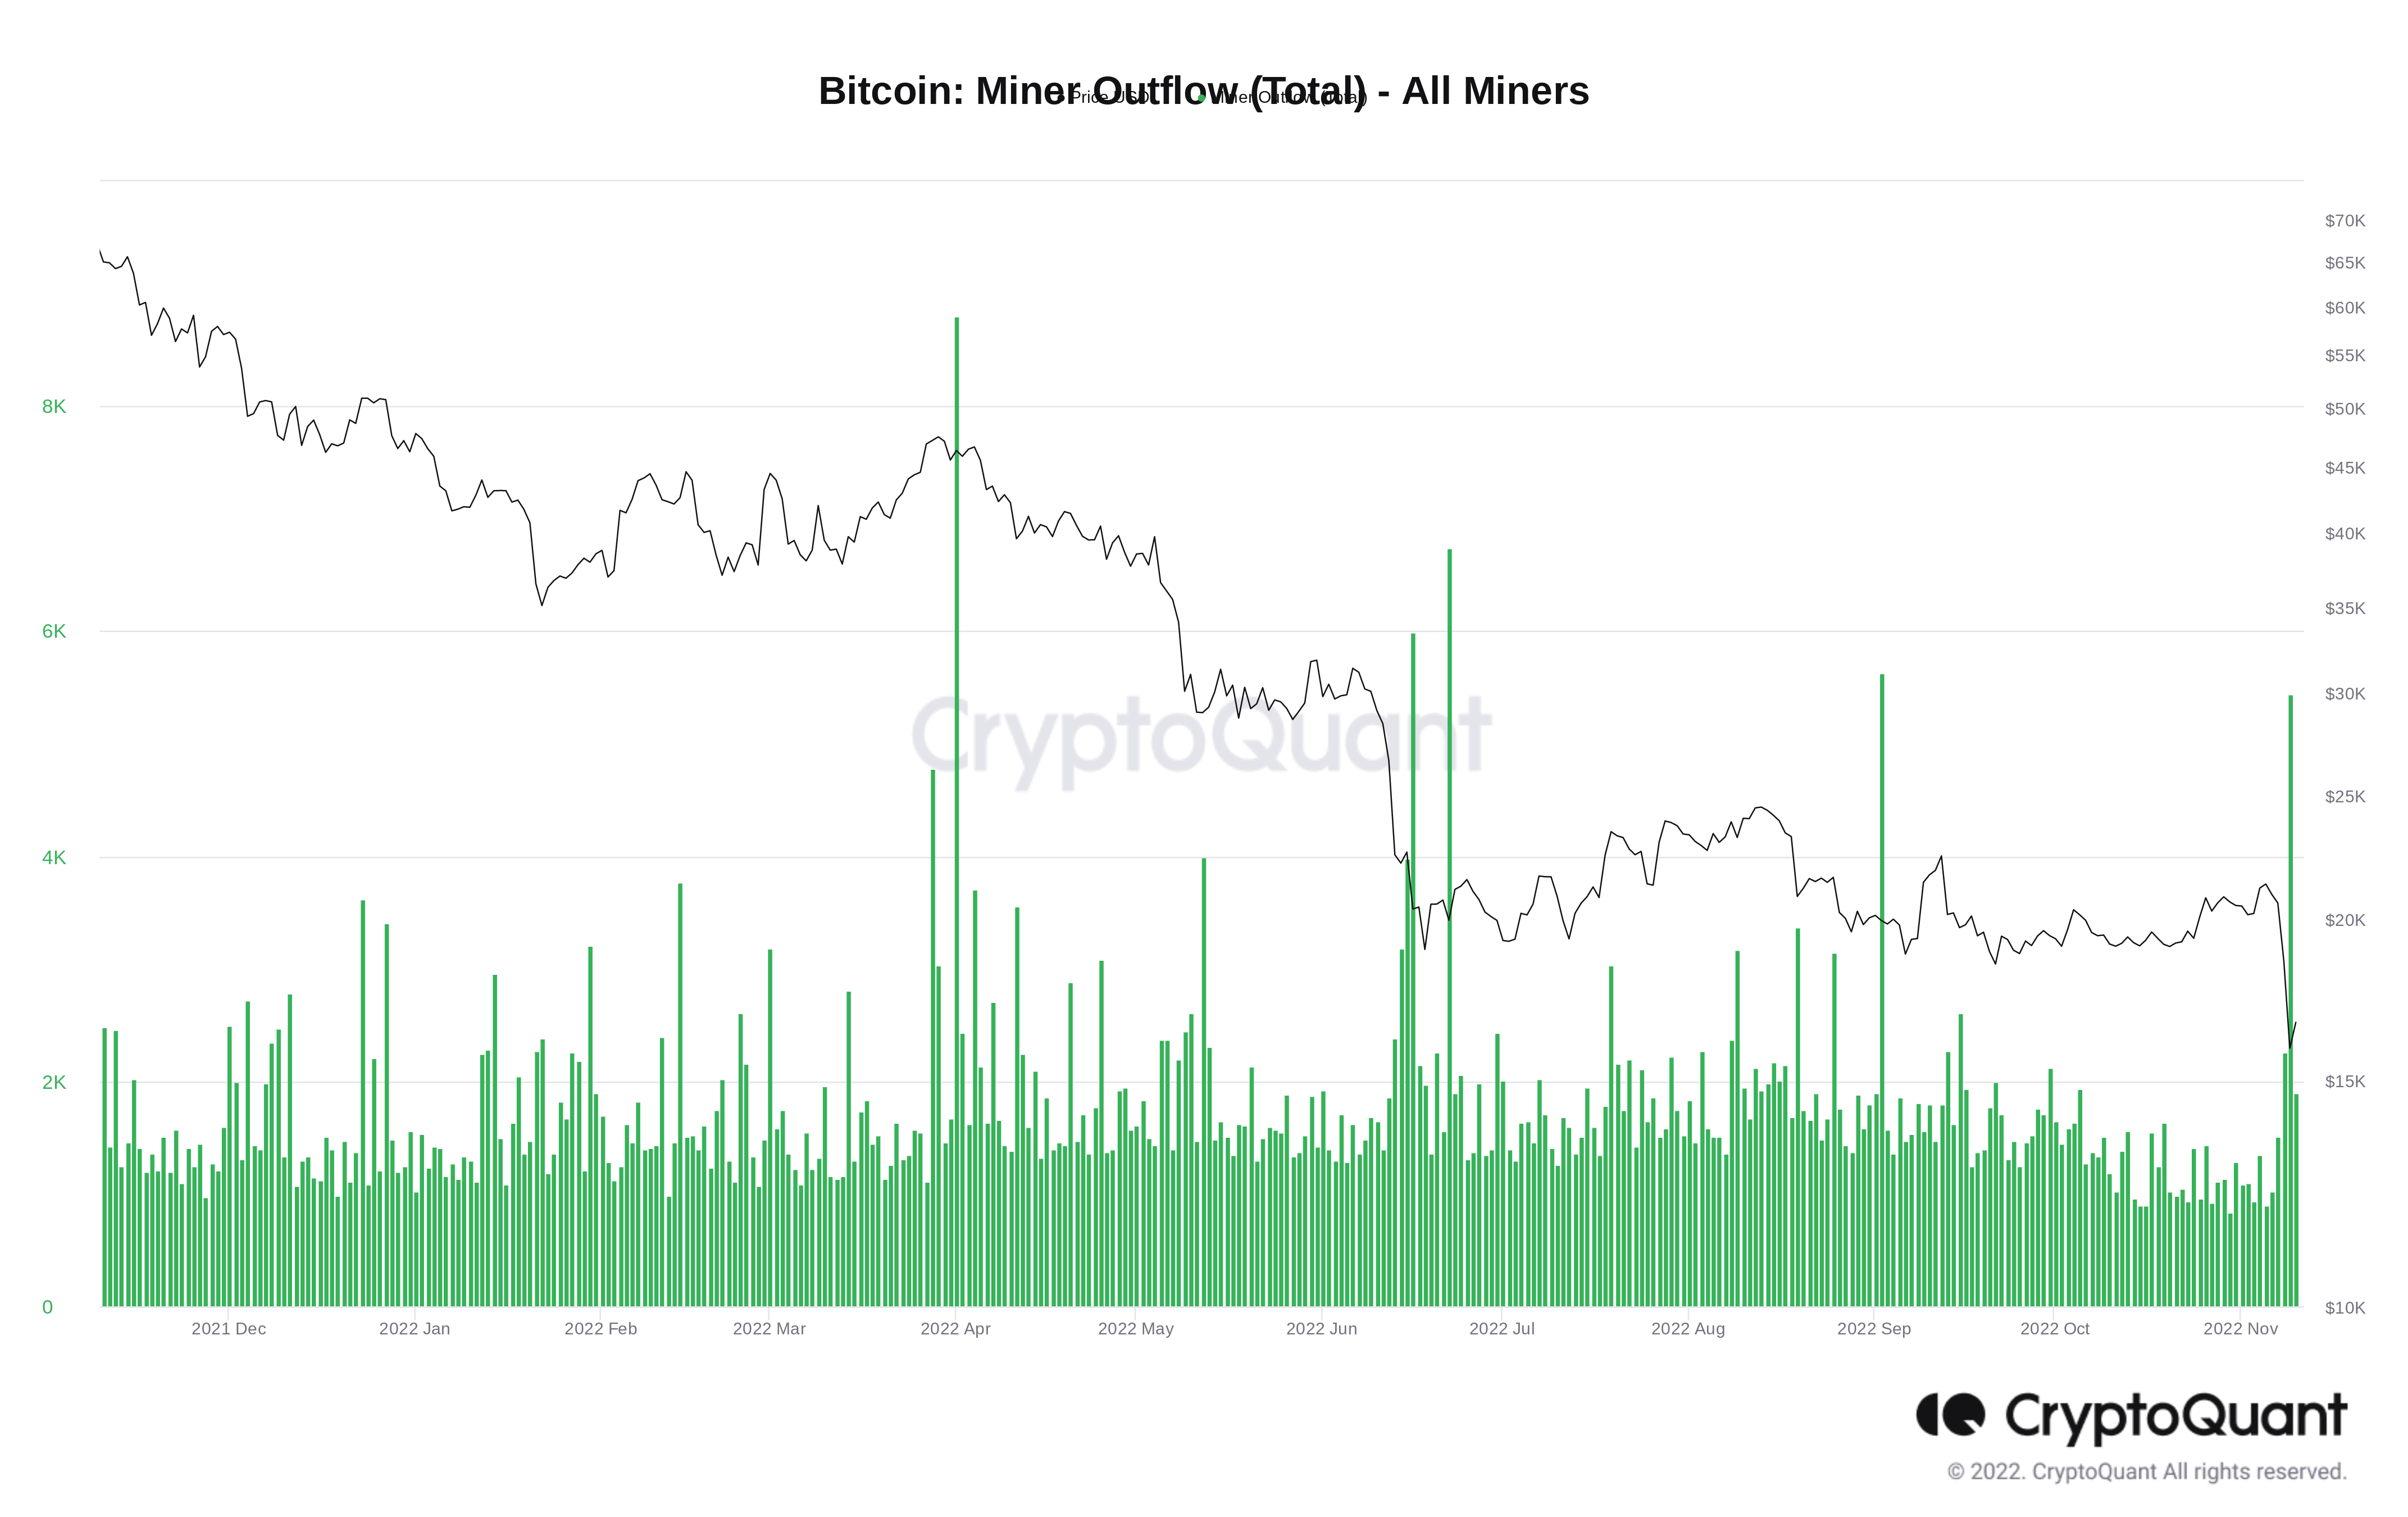 miner-outflow - Briefly